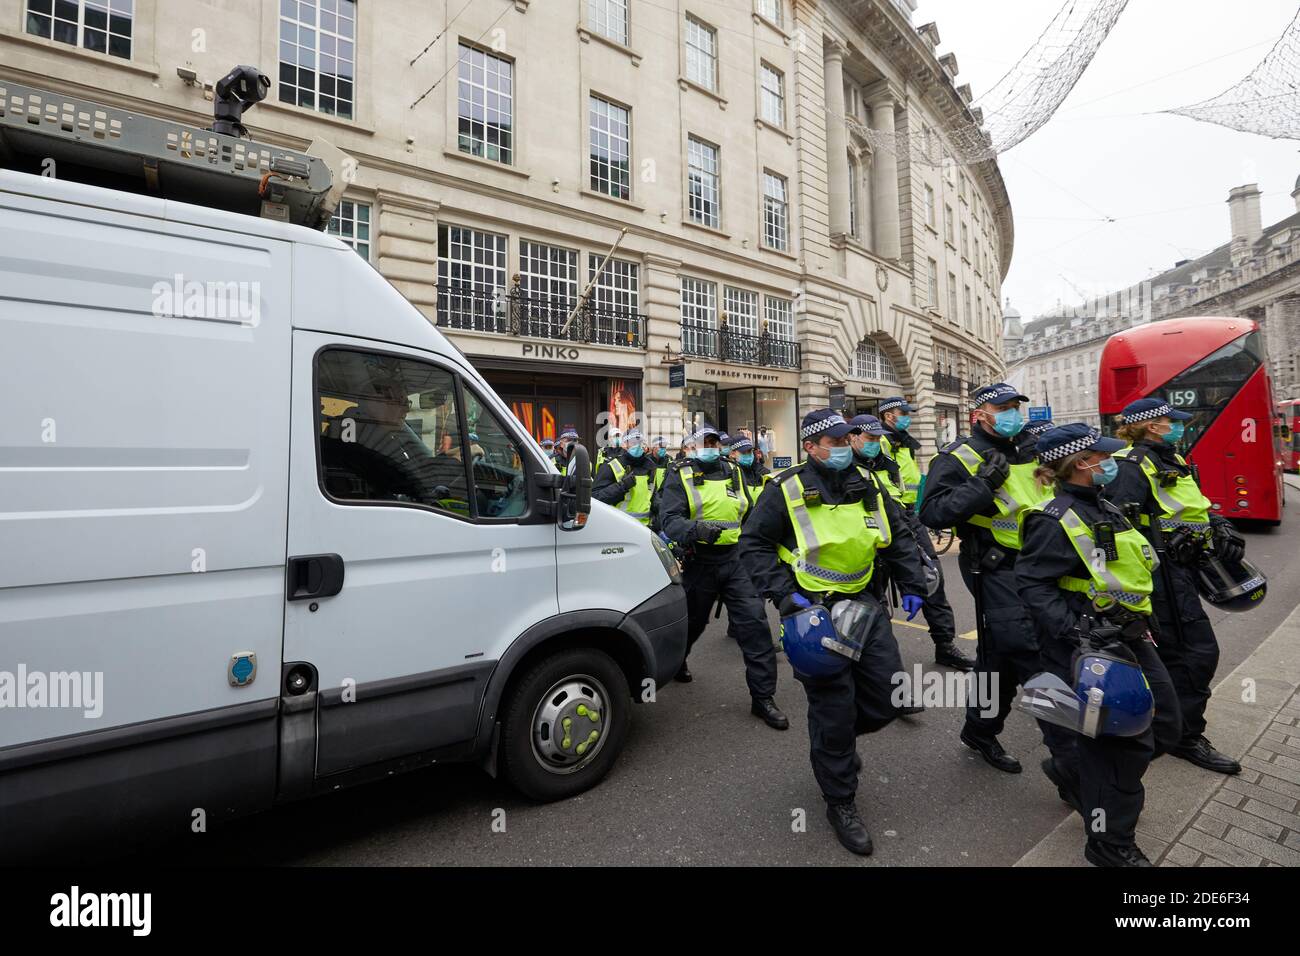 London, UK. - 28 Nov 2020: A heavy police presence next to an unmarked surveillance van at an anti-lockdown protest in the capital. Stock Photo